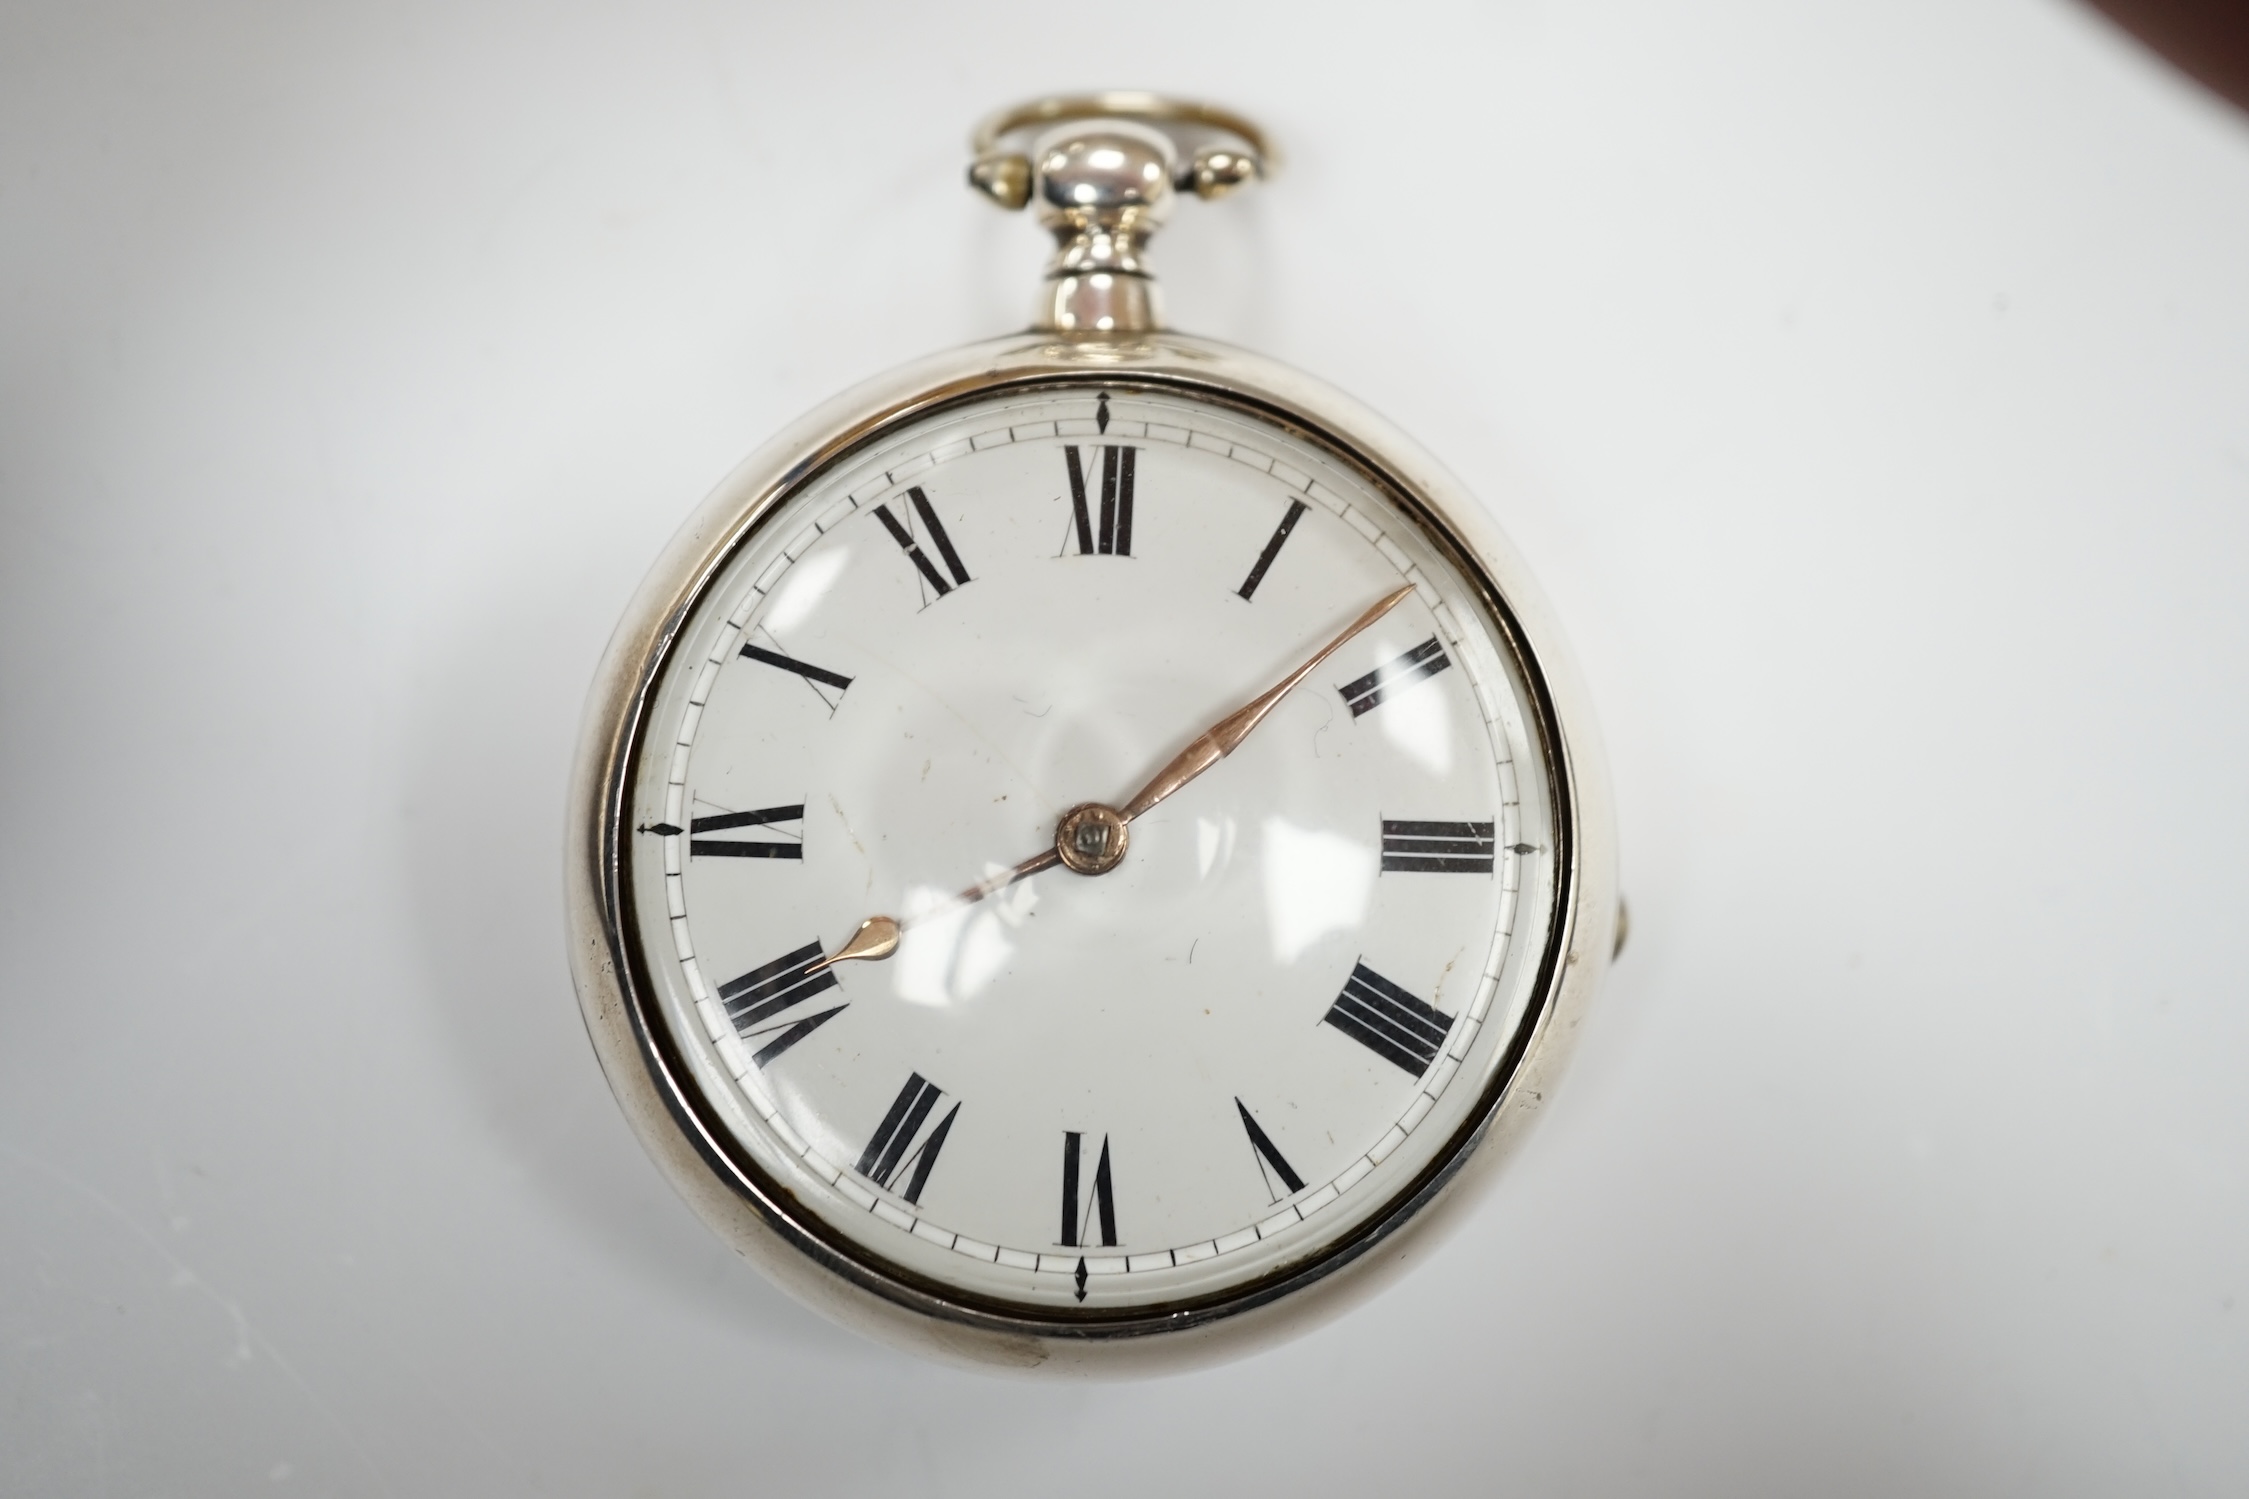 A George III silver pair cased keywind verge pocket watch, by W, Atwood of Lewes, with Roman dial and signed movement numbered 4644, outer case diameter 56mm.